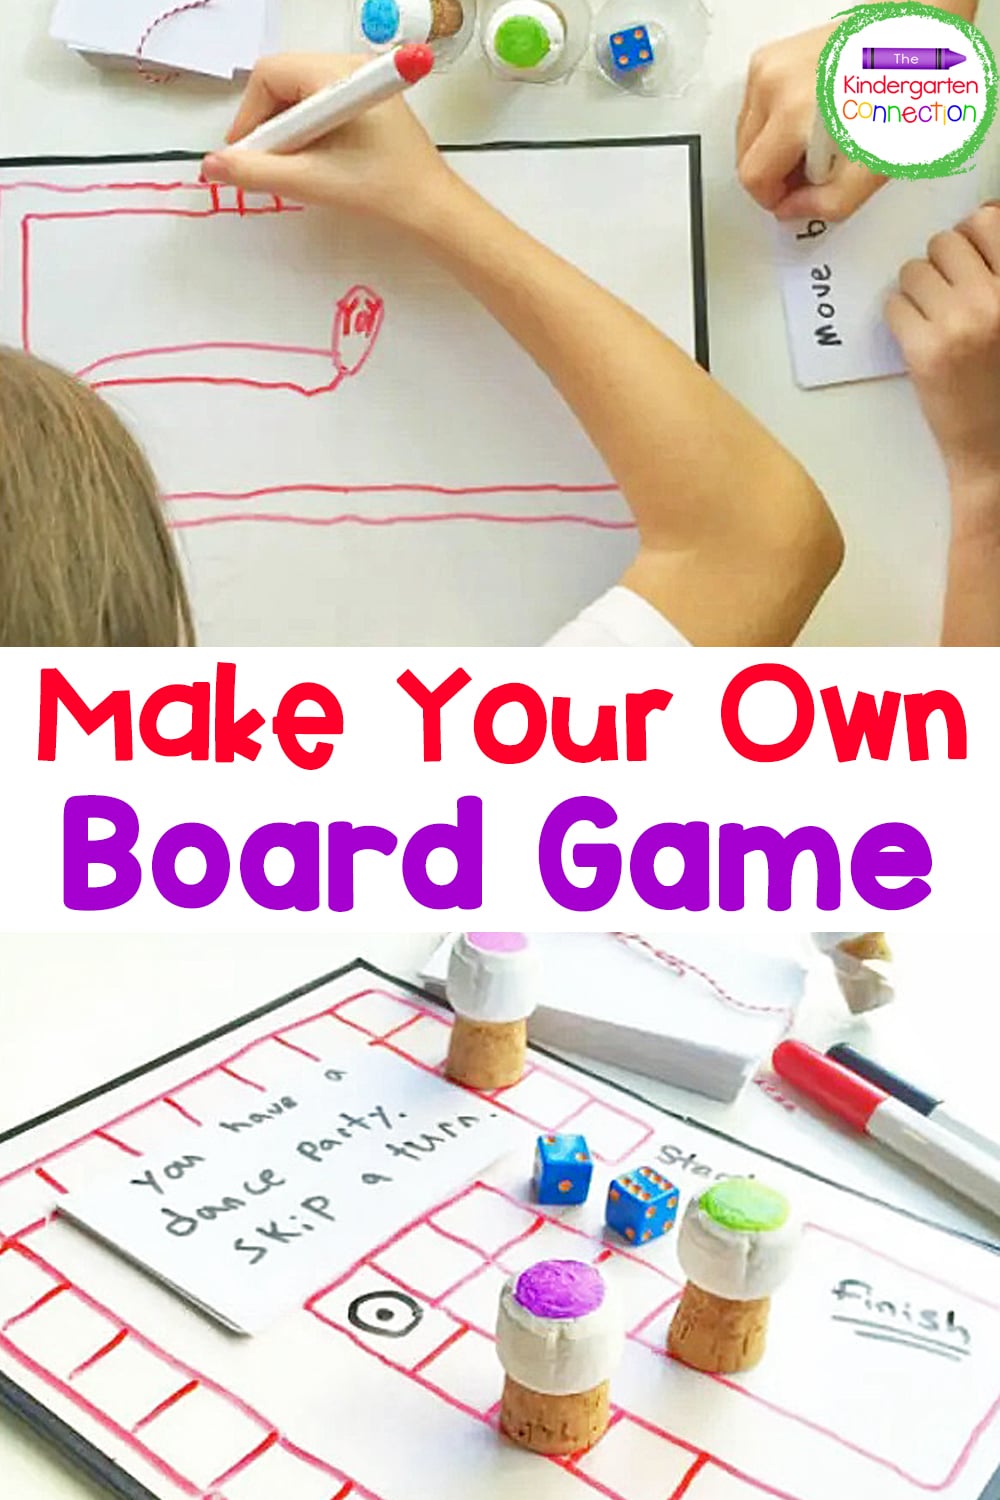 Board games can provide lots of creative playtime fun, but they can also be expensive. So why not make your own board game?